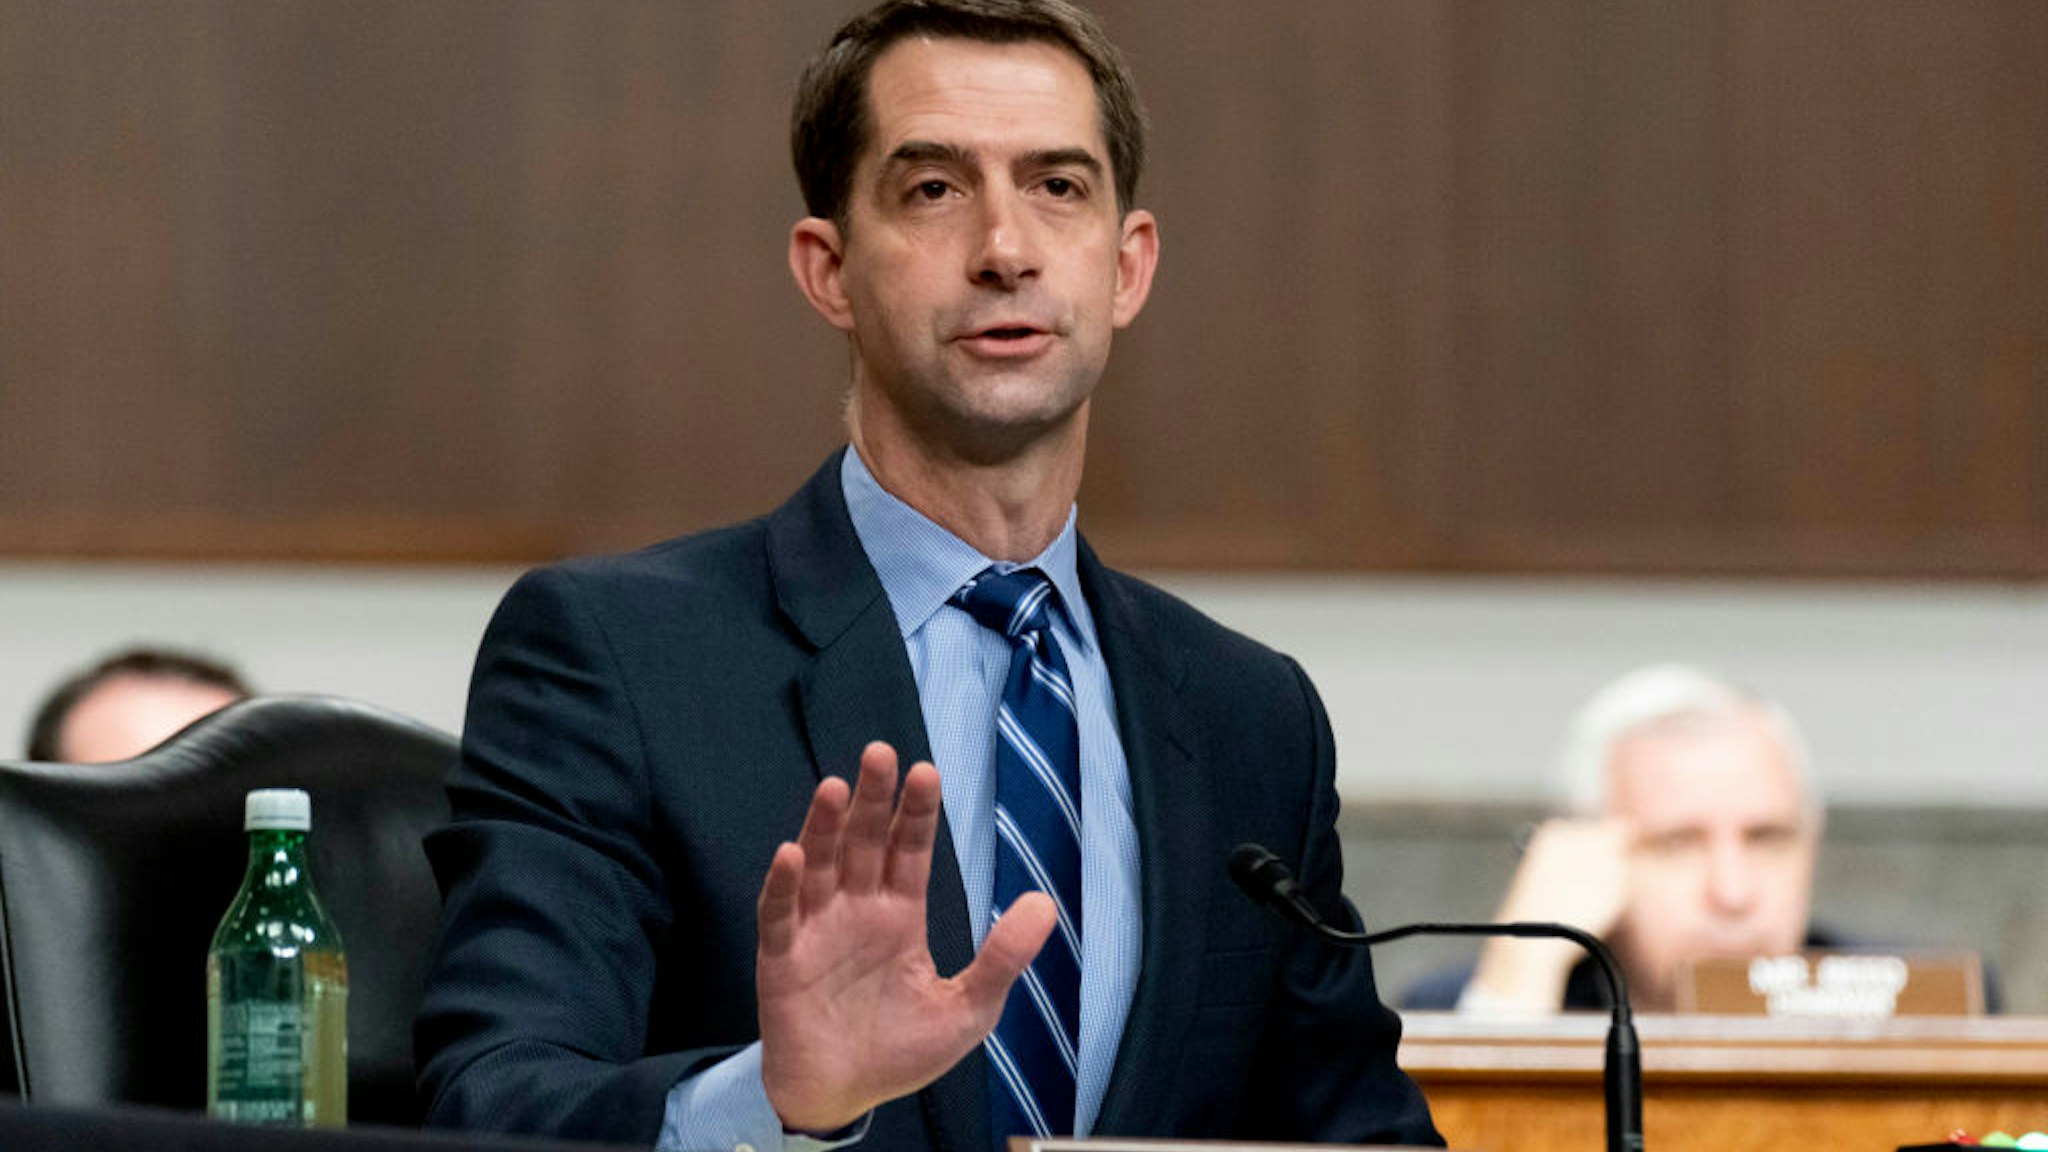 Sen. Tom Cotton (R-AR) speaks during a hearing to examine United States Special Operations Command and United States Cyber Command in review of the Defense Authorization Request for fiscal year 2022 and the Future Years Defense Program, on Capitol Hill on March 25, 2021 in Washington, DC.